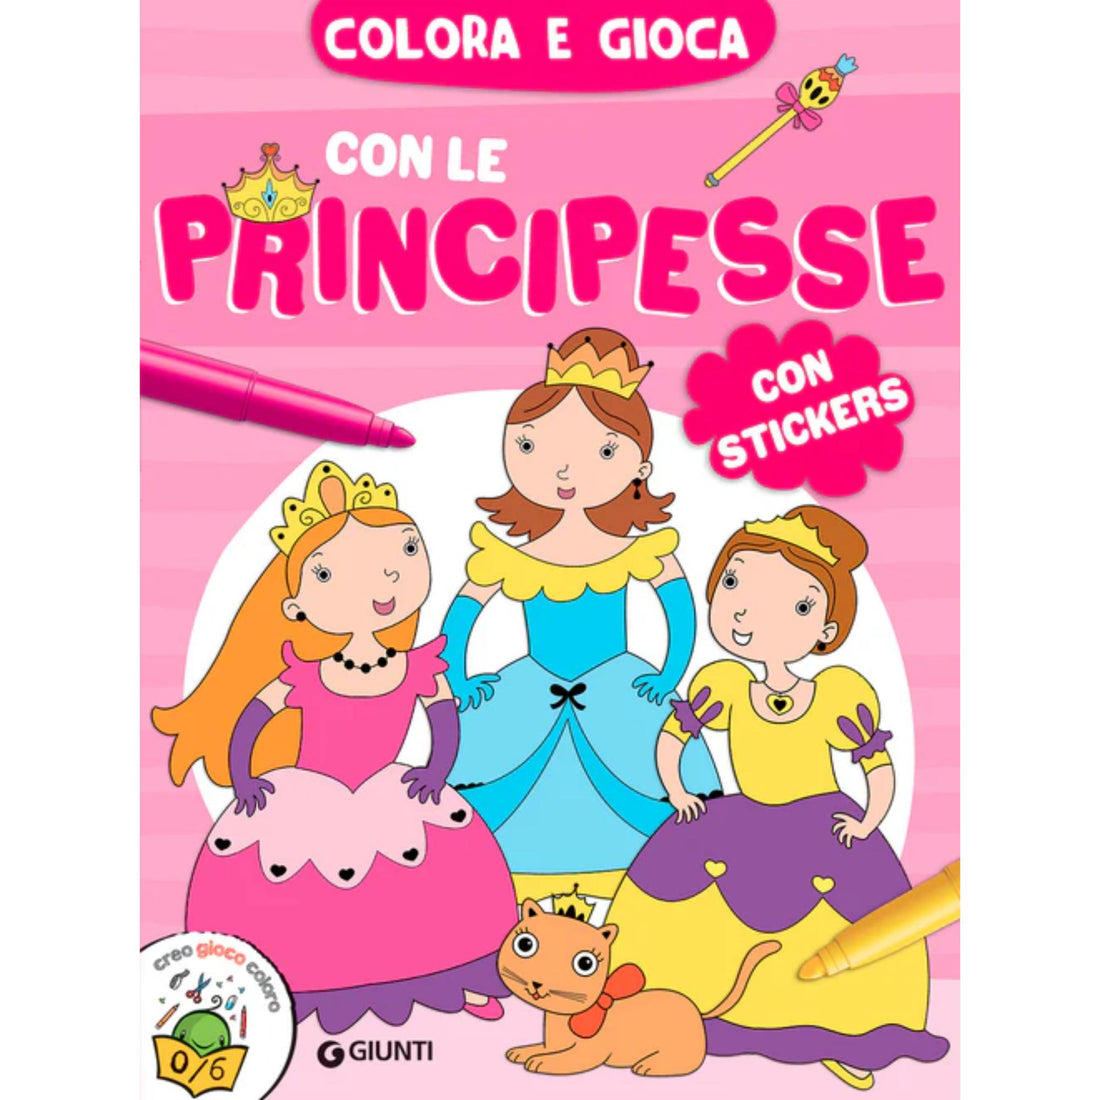 Color and play with the princesses